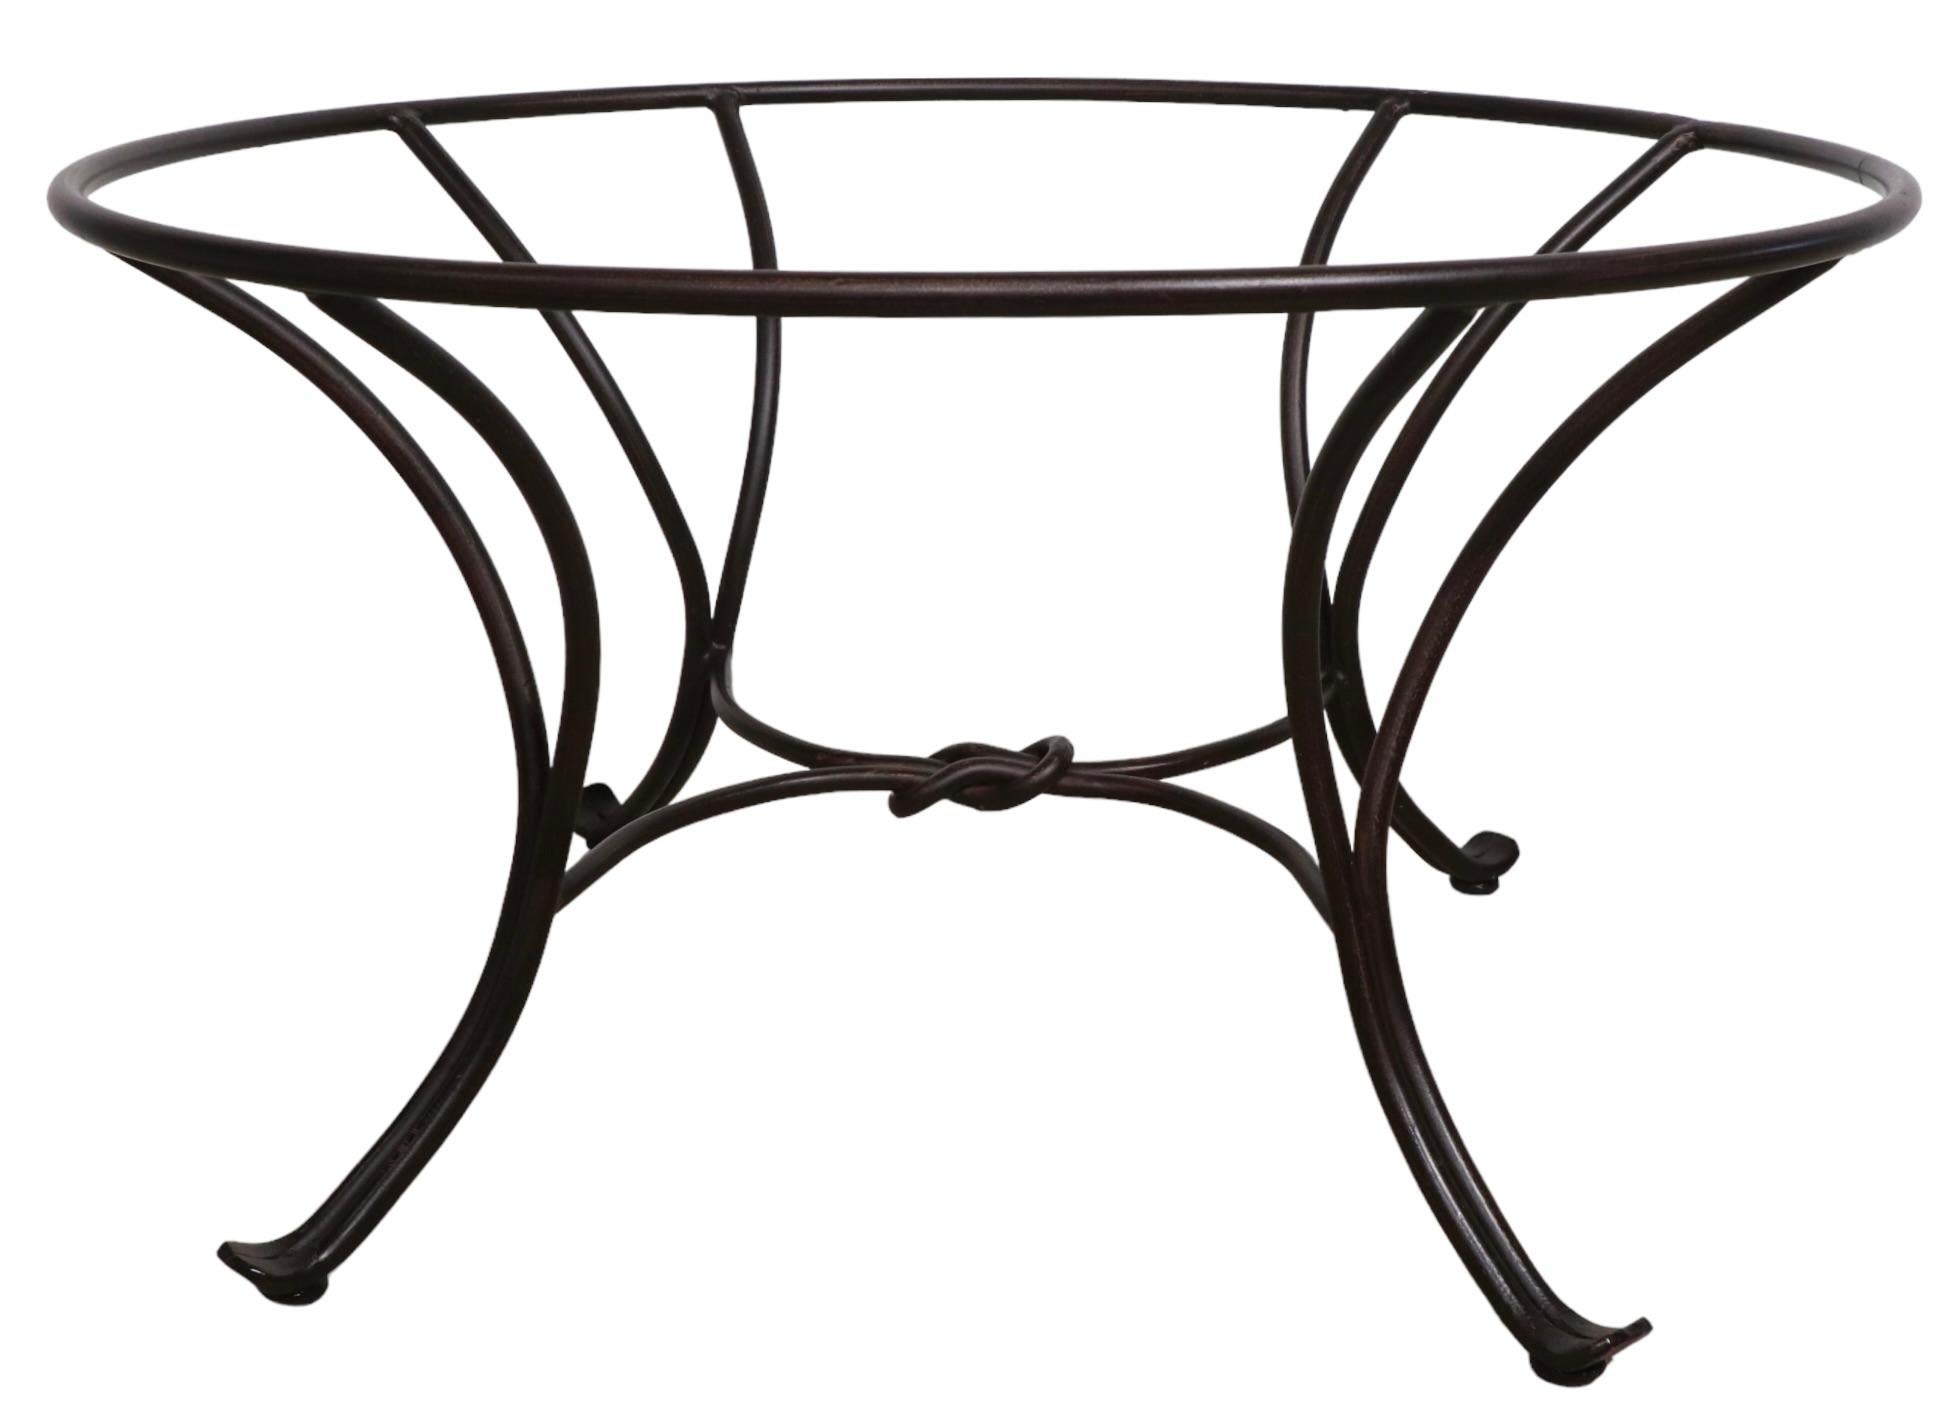 American Wrought Iron and Glass Coffee Table